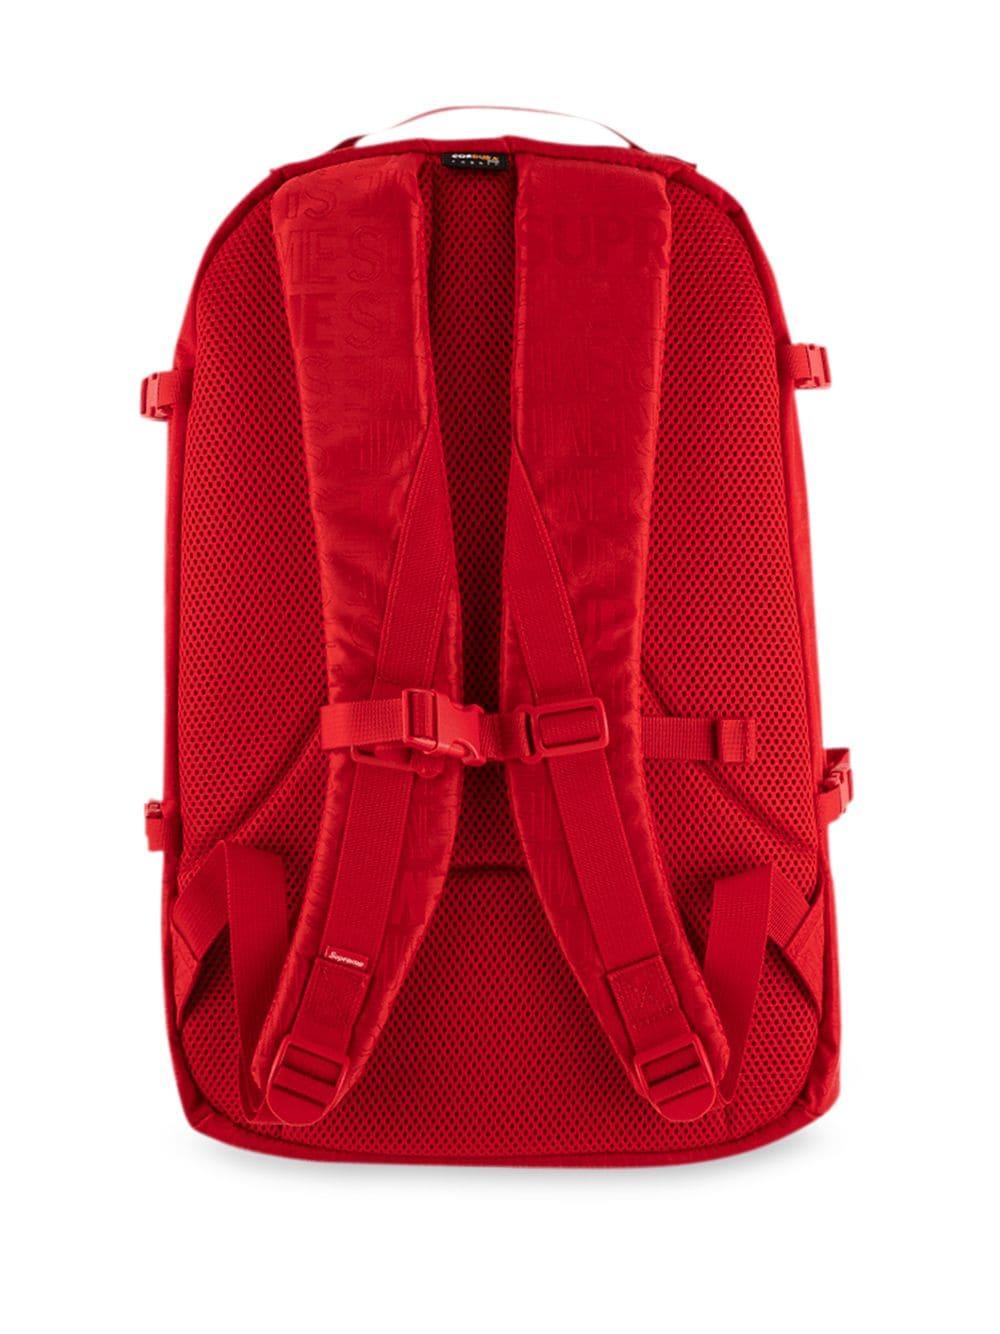 Supreme Ss19 Logo Backpack in Red - Lyst